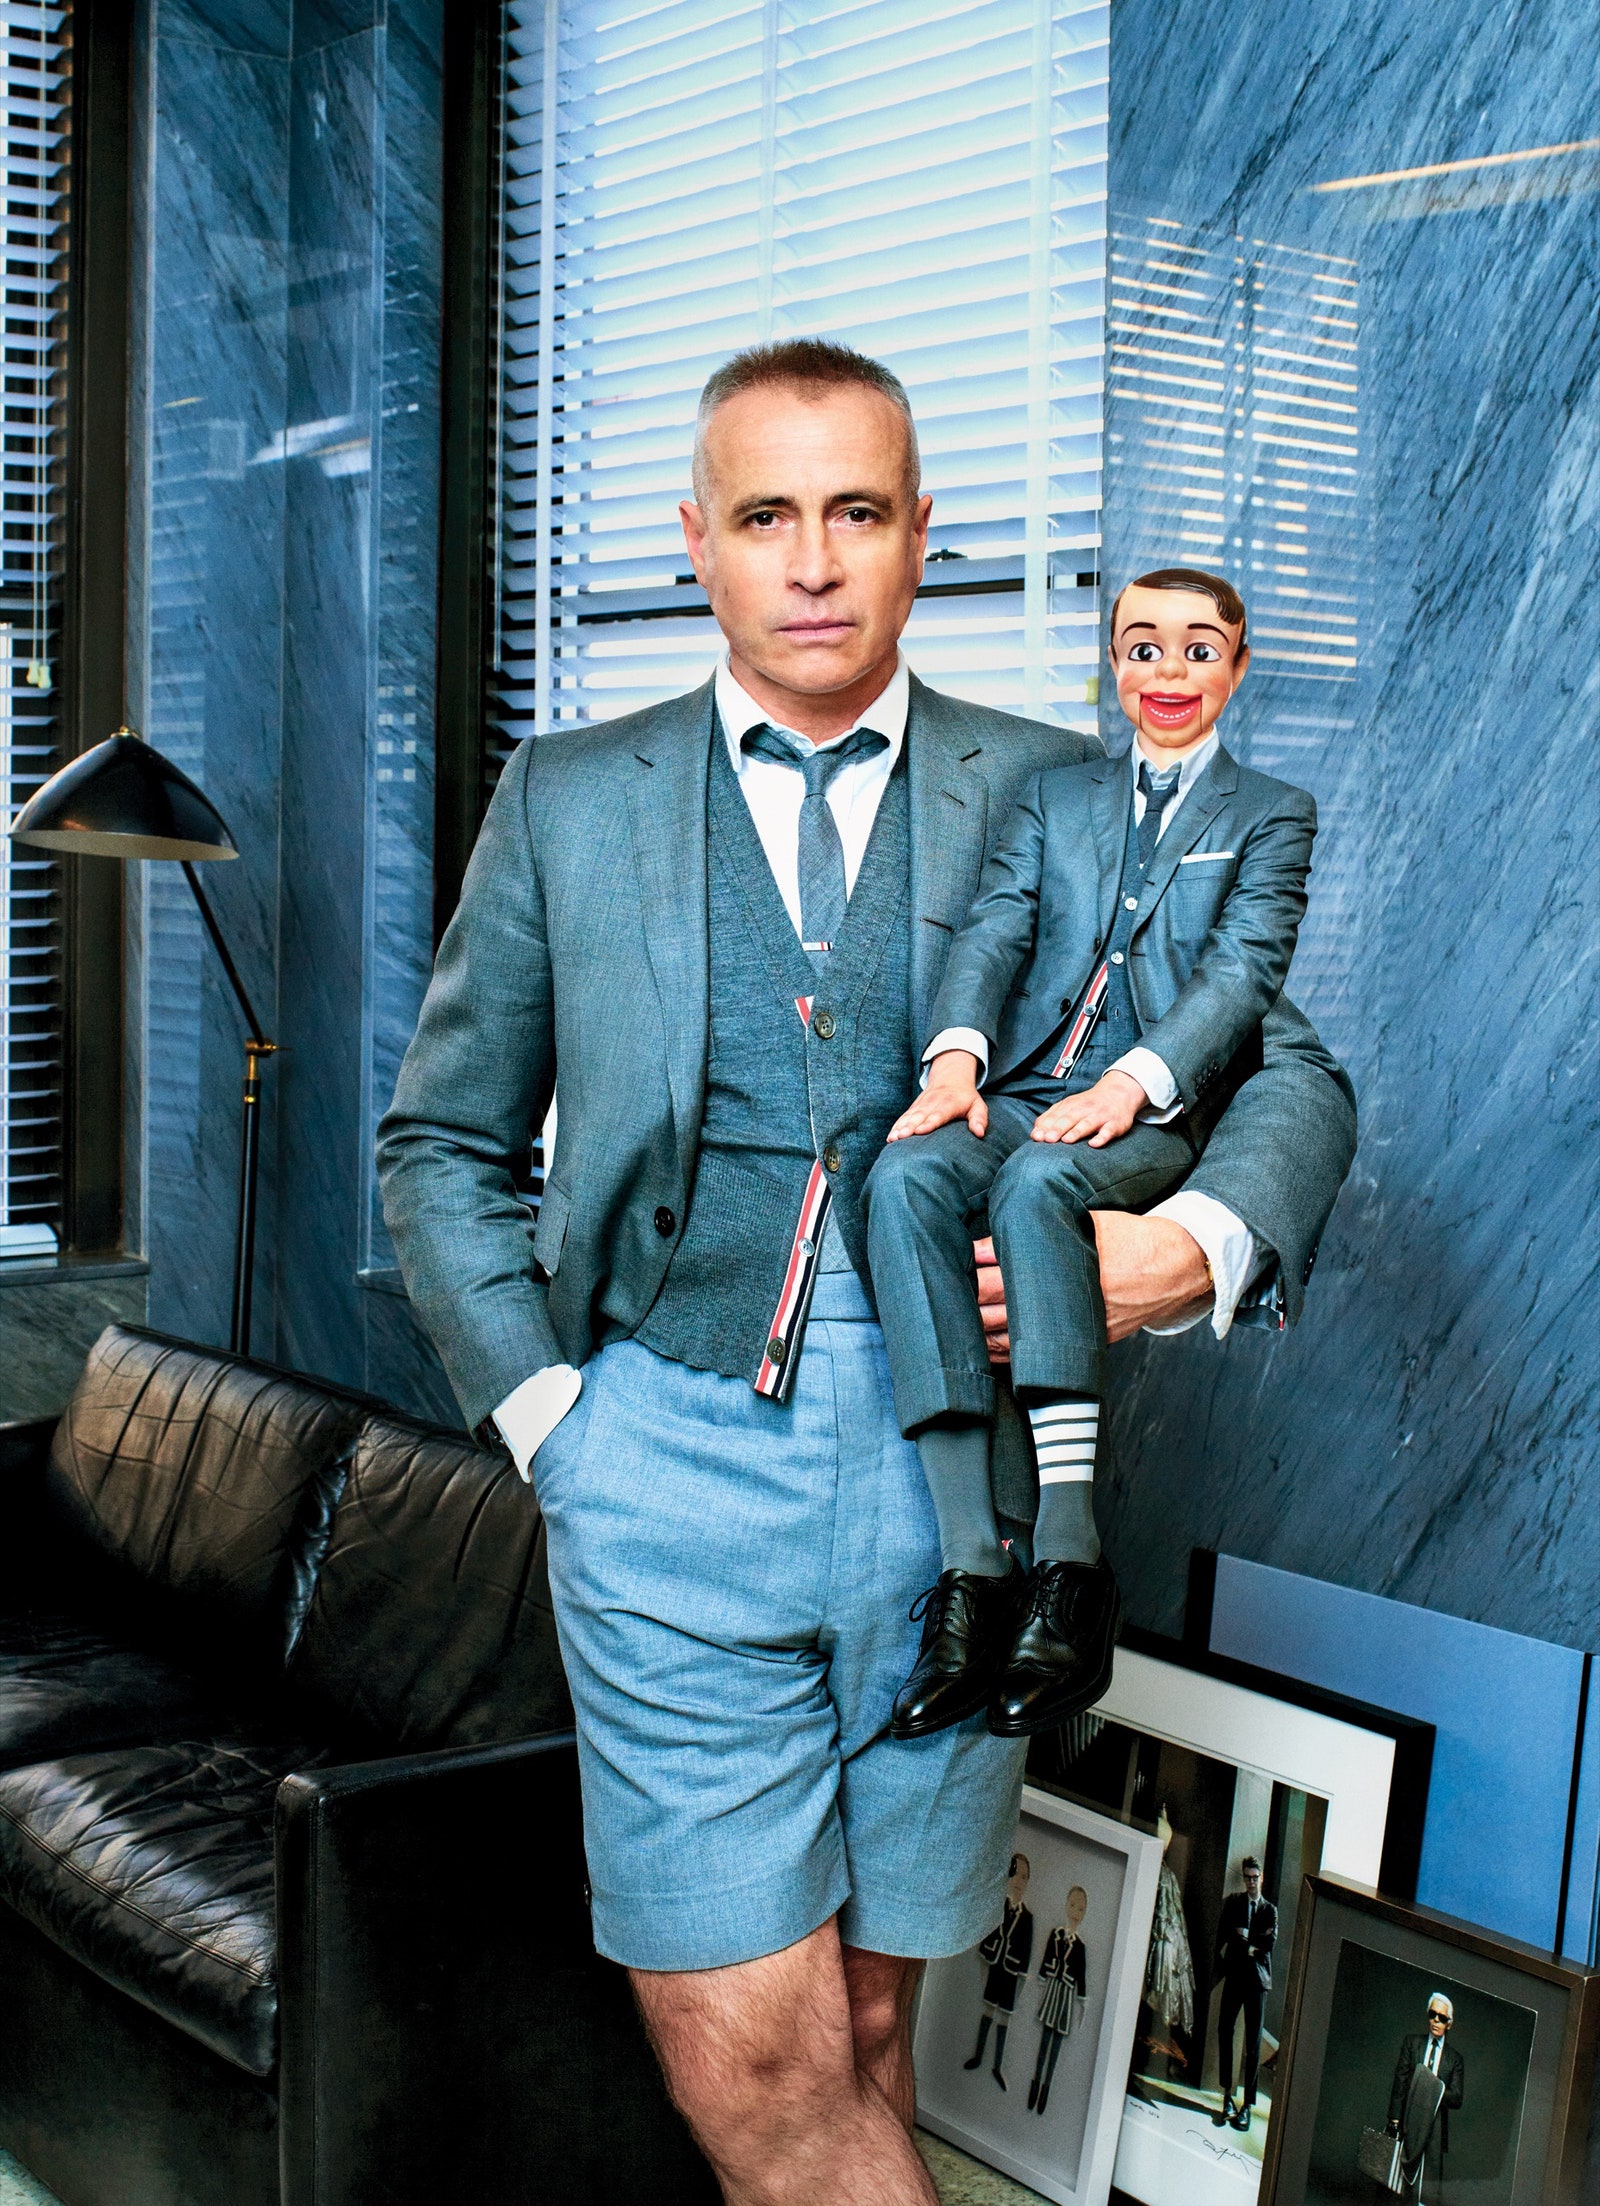 Thom Browne holding a ventriloquist's dummy. Both wear similar grey suits.